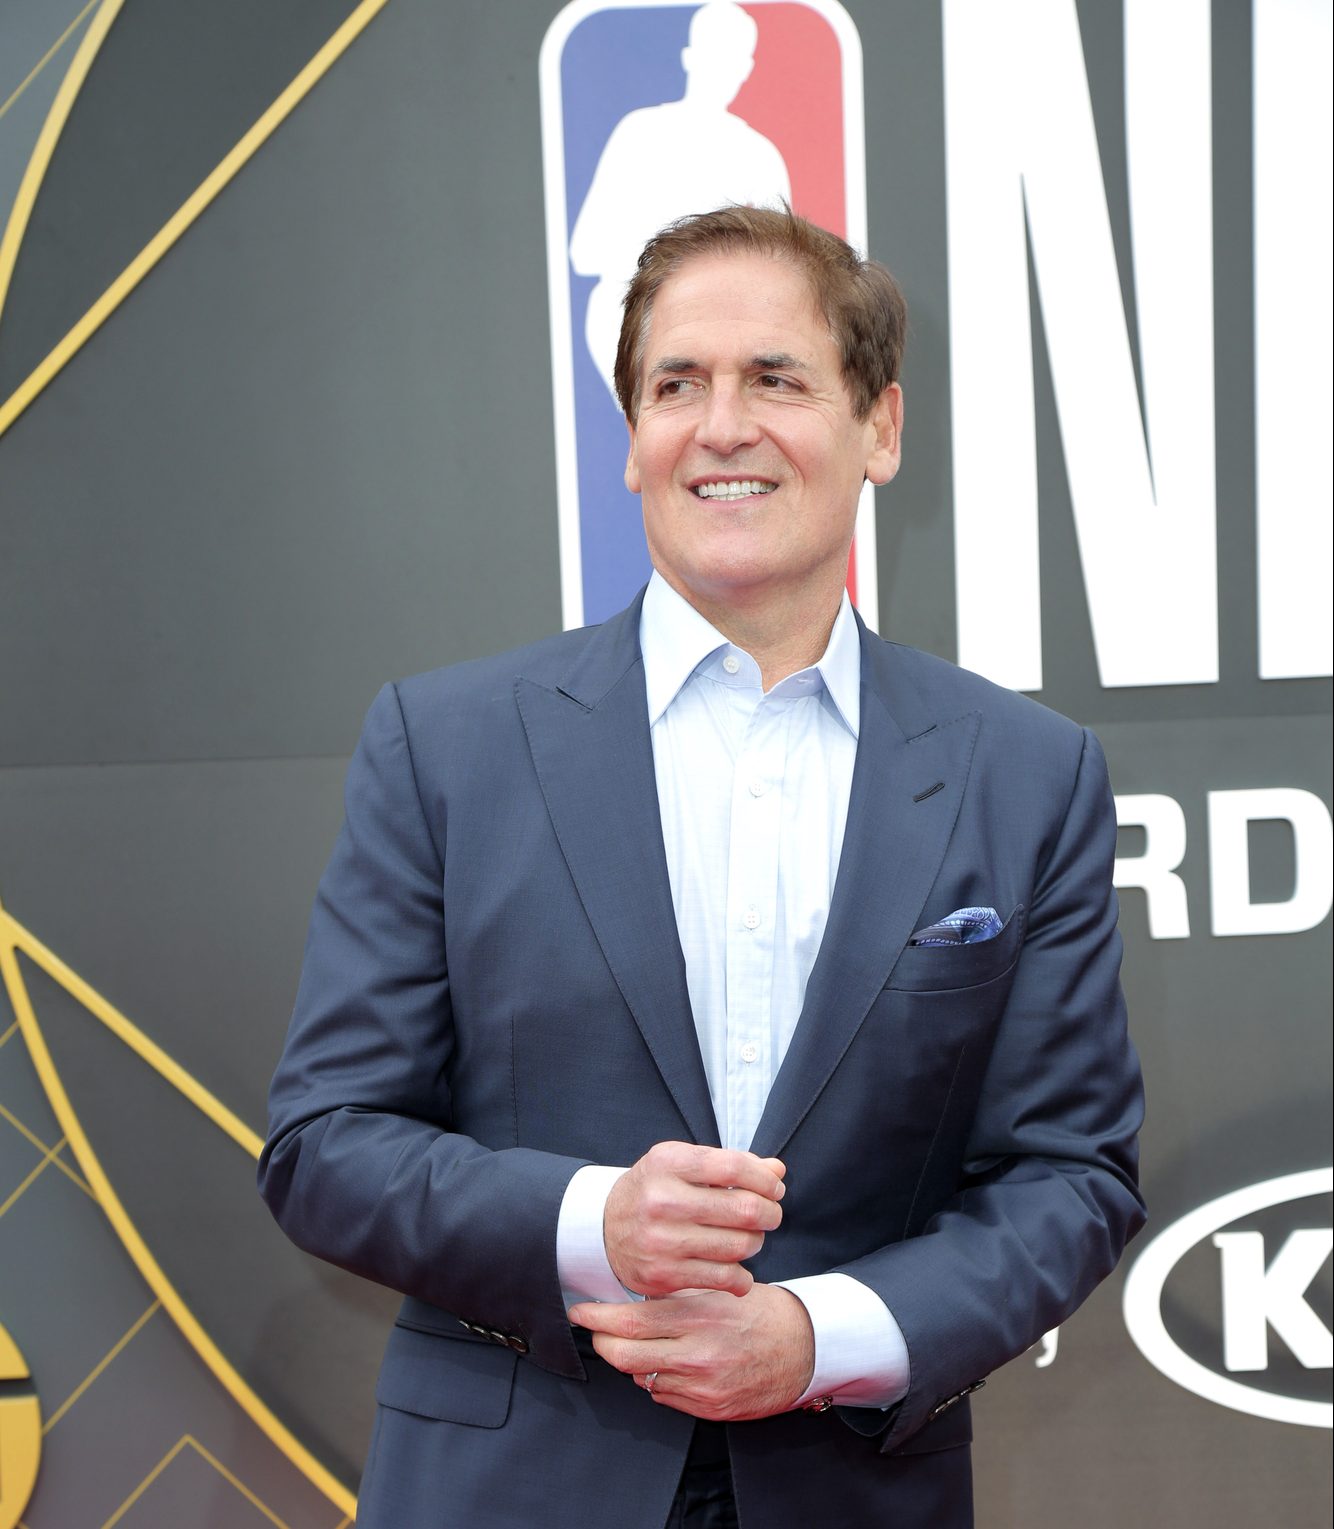 25 Awesome Mark Cuban Quotes to Inspire and Motivate Your Entrepreneurial Journey